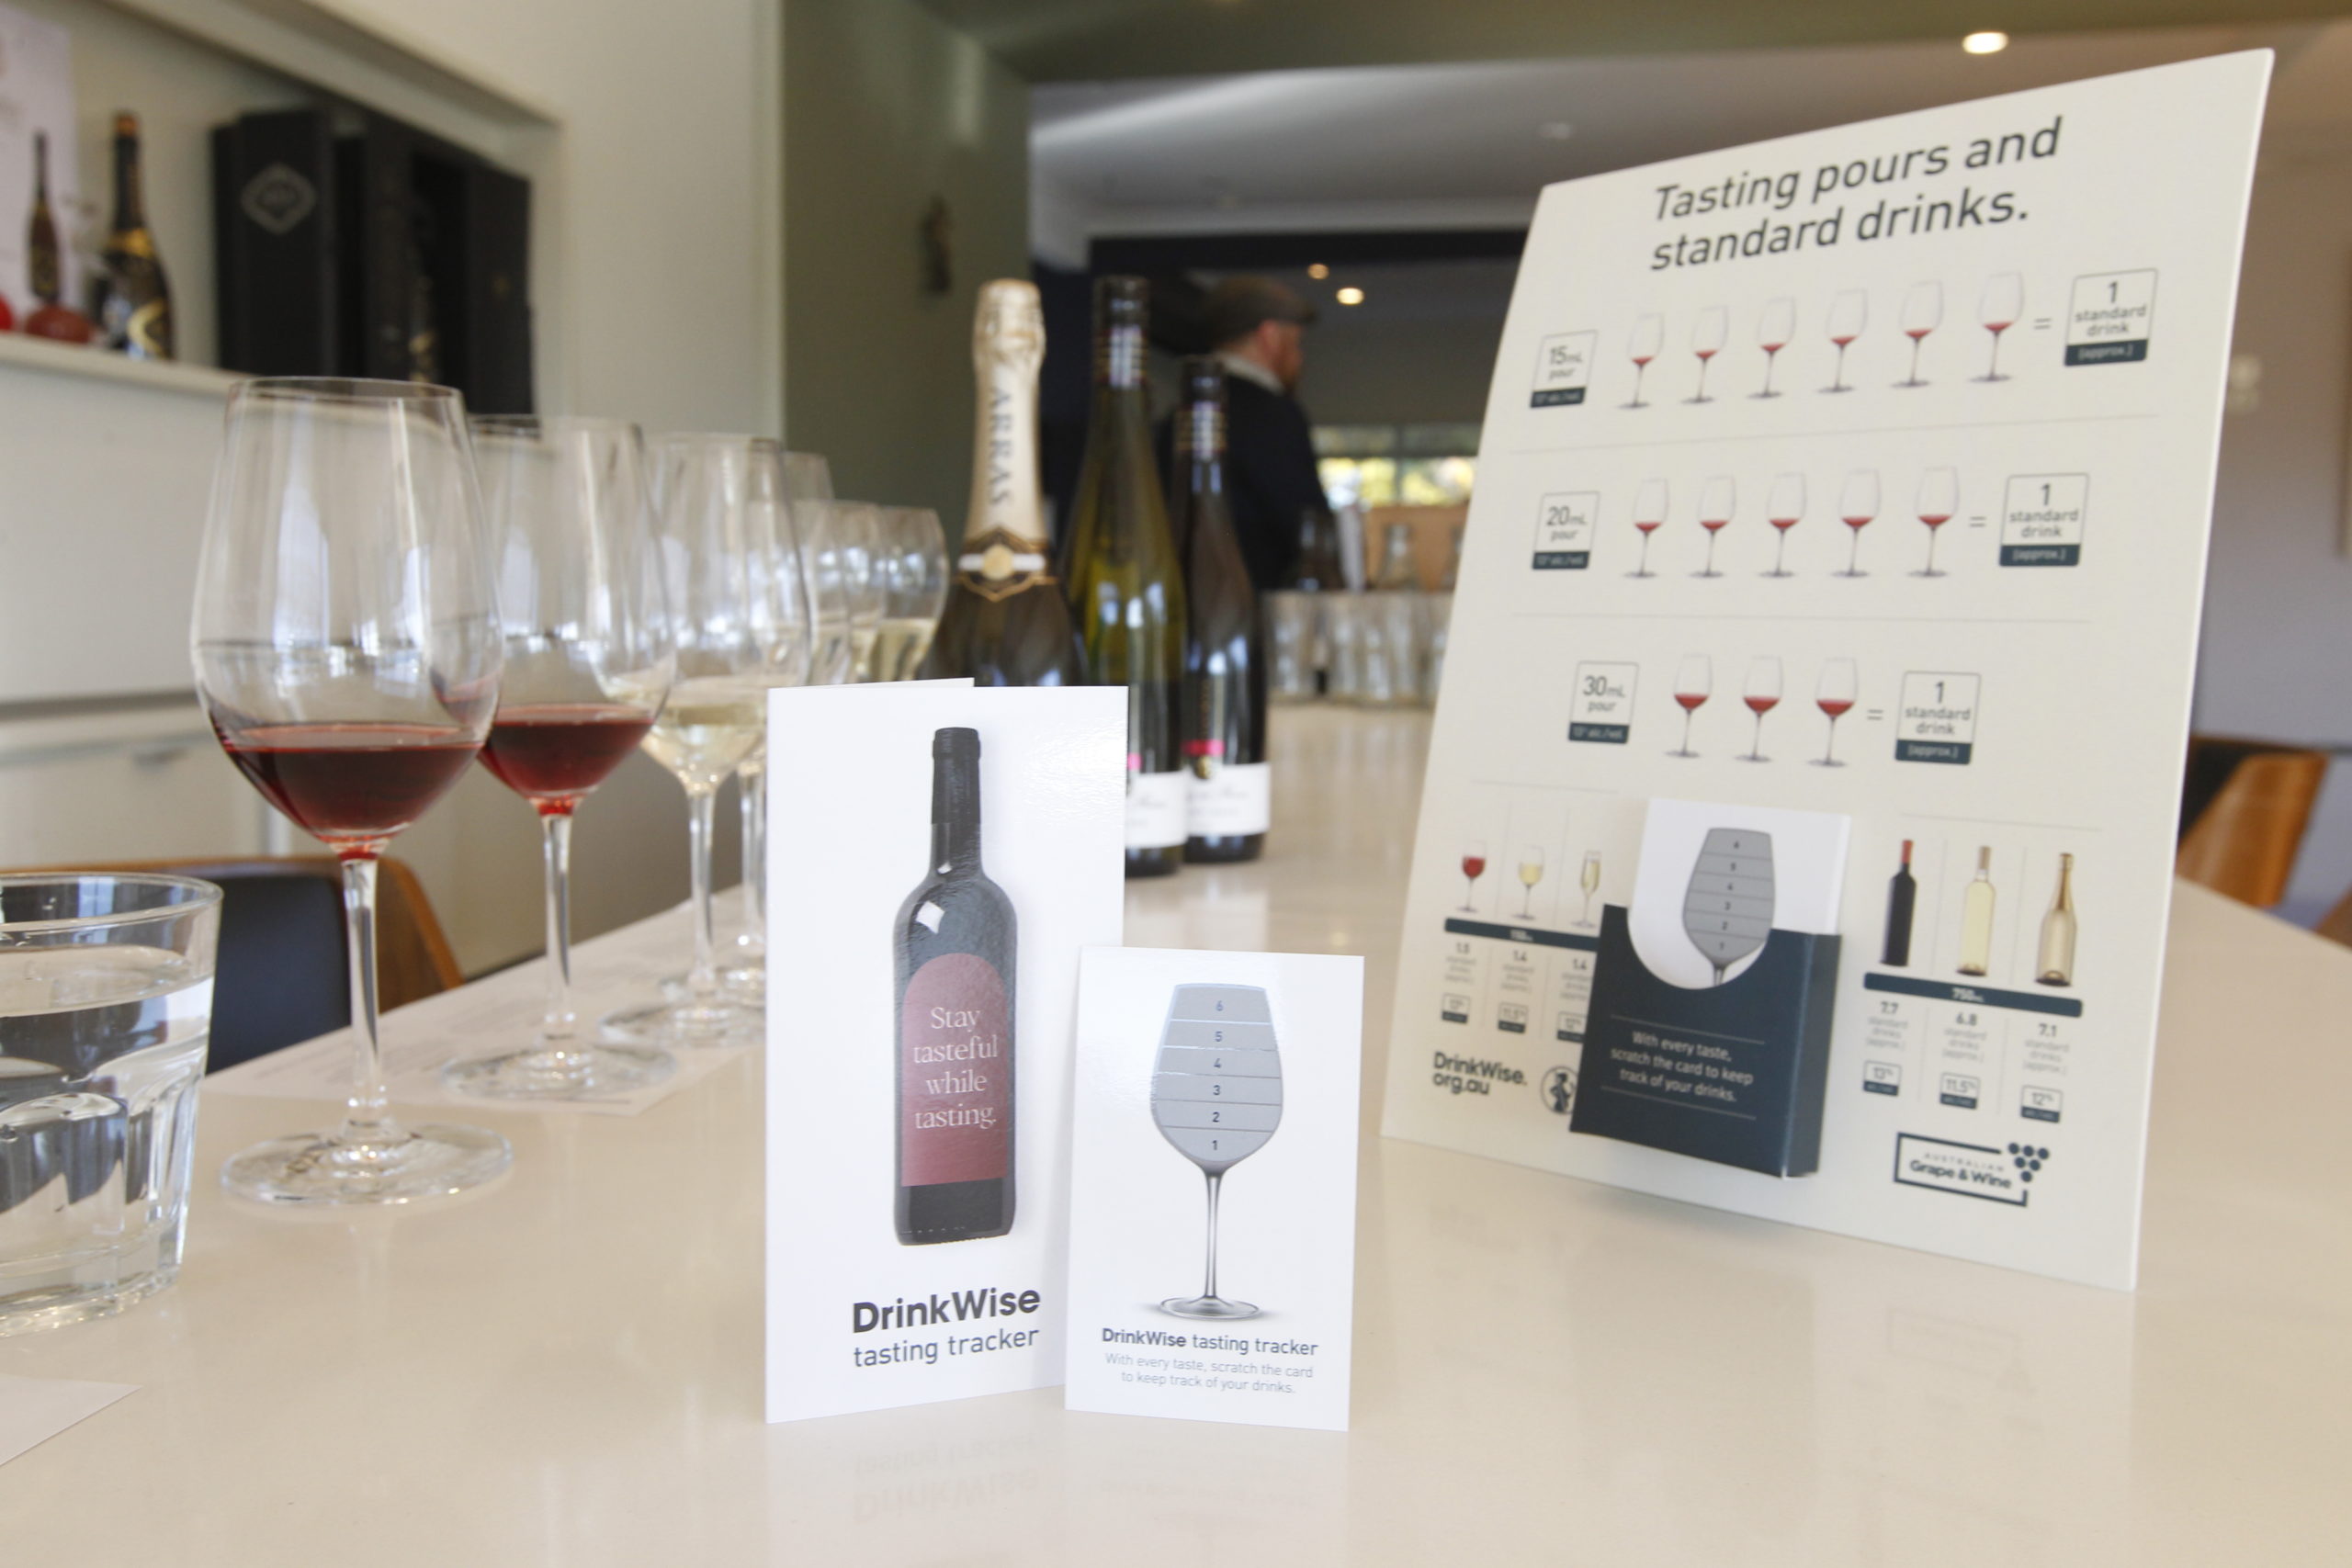 Stay tasteful while tasting resources - scratchies for Festivals and cellar door visits, standarad drinks posters and card holder stands